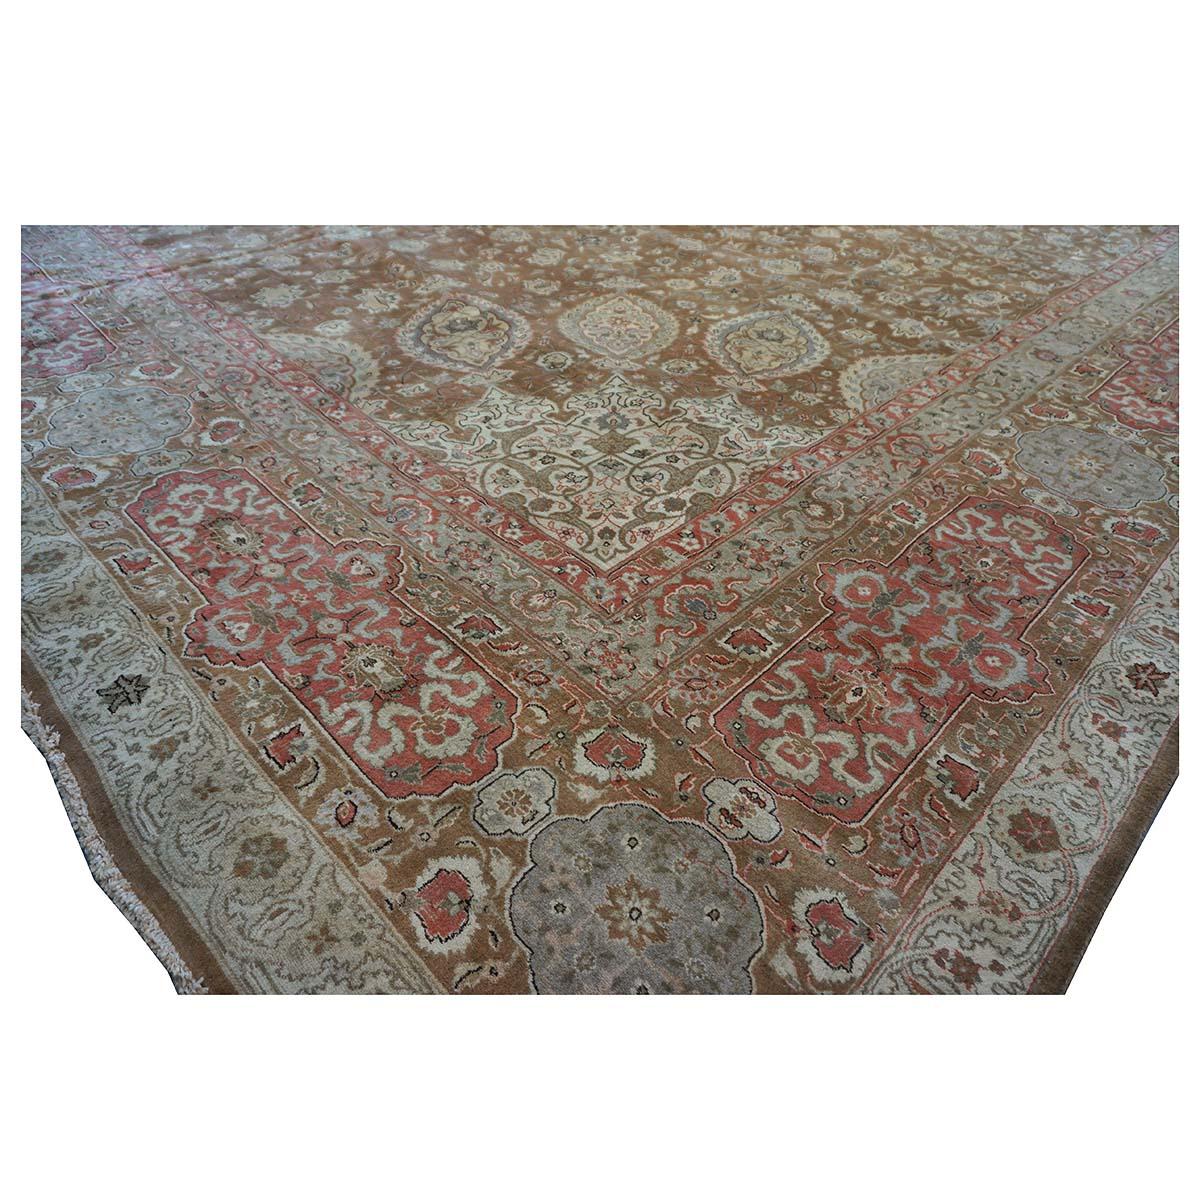 Antique 1930s Persian Tabriz 13x20 Brown & Salmon Oversized Handmade Area Rug For Sale 7